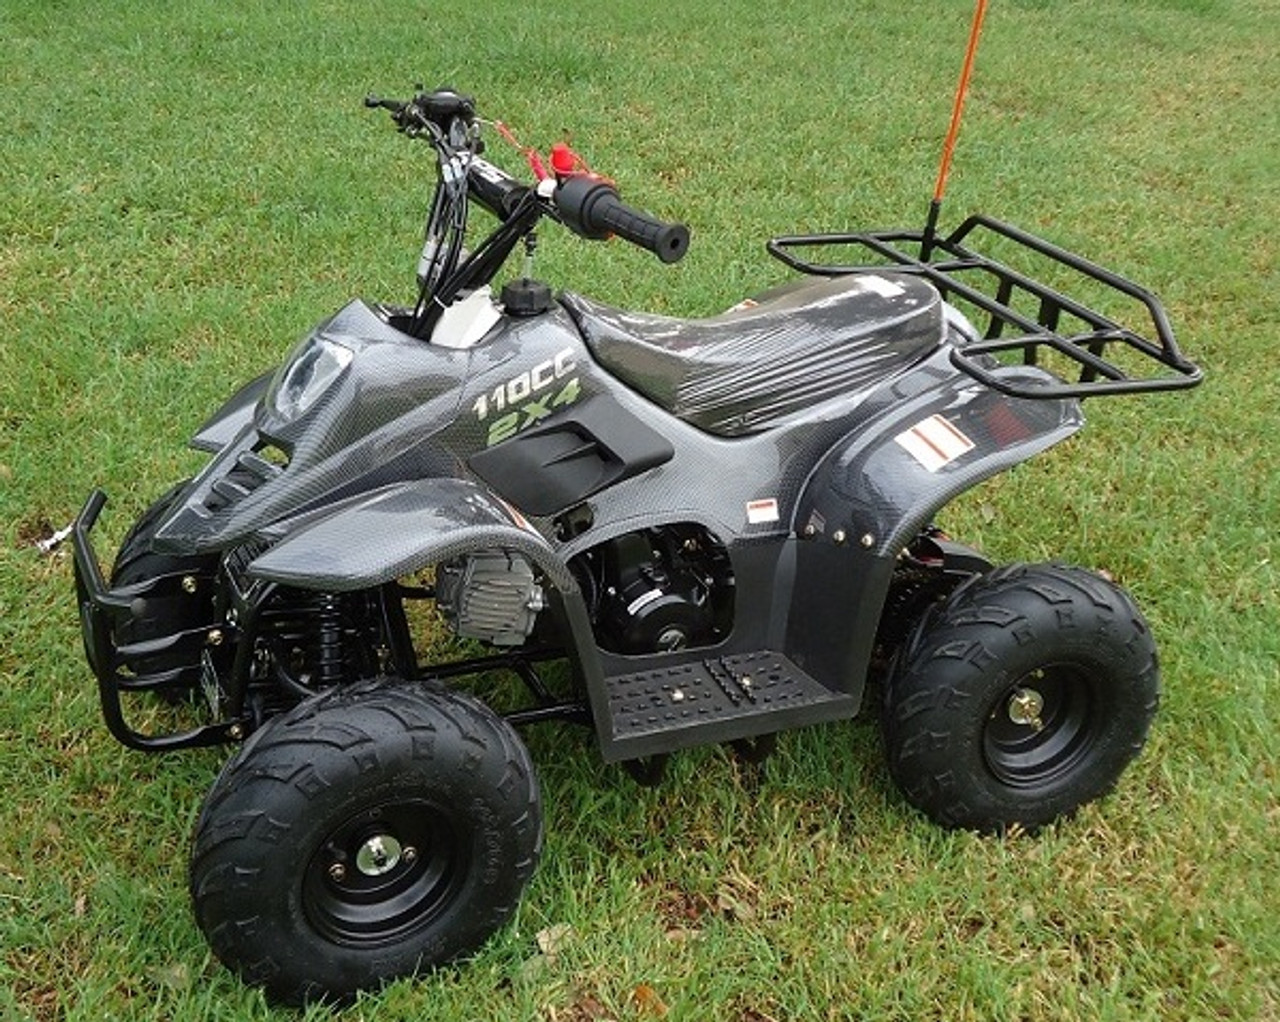 New Rps Crt 110-6S Atv 110Cc Air Cooled, Single Cylinder 4 Stroke - Fully Assembled And Tested